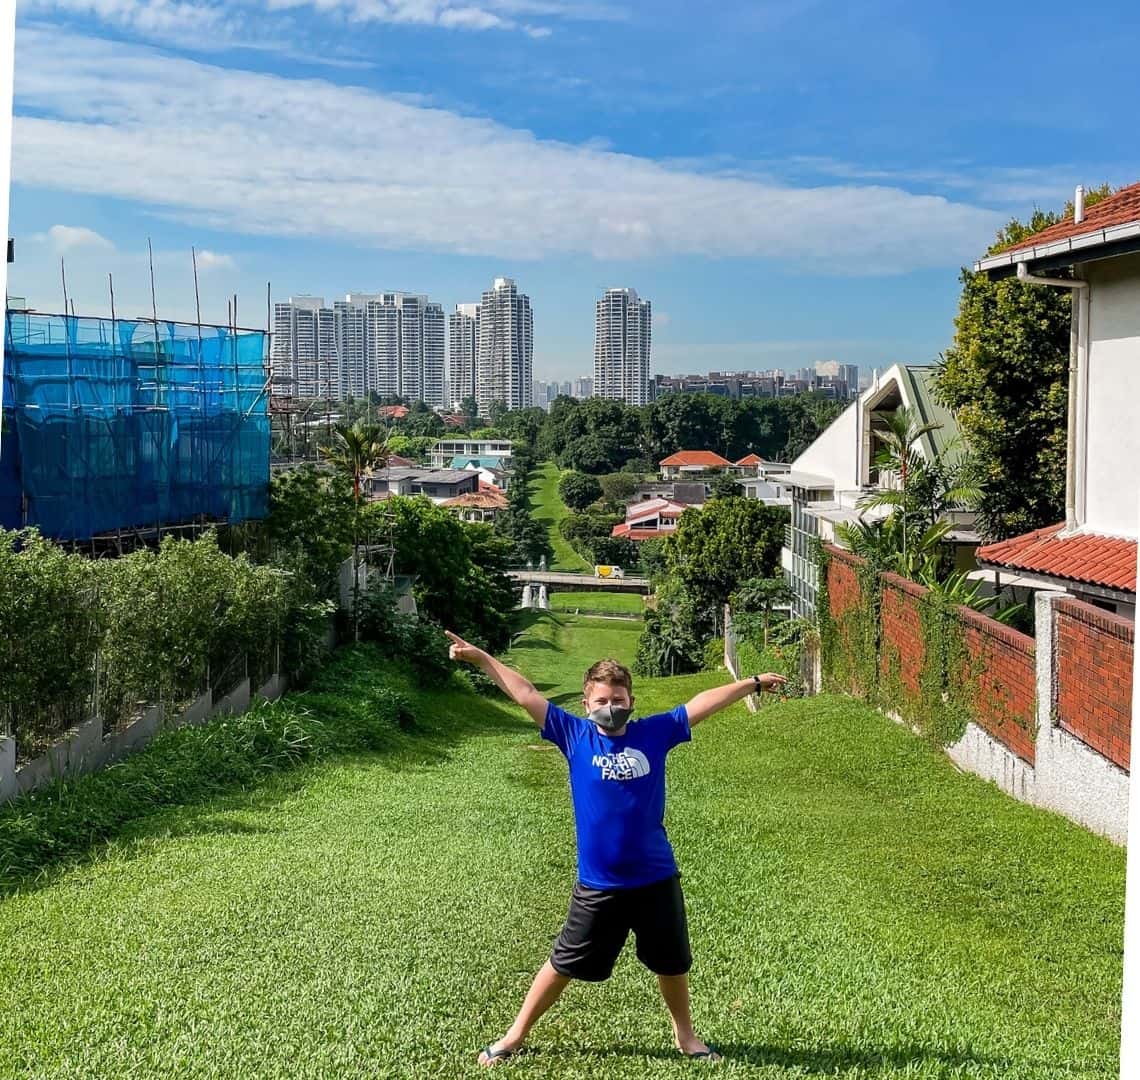 Think one in great shorts and a bright blue top stands at teh top of a green stretch of grass. On the left is green shrubbery and on teh rights some white walls with Spanish style terracotta grooves and shutters. There is also some scaffolding on the left. In the distance is a high rise, some smaller buildings and a blue sky